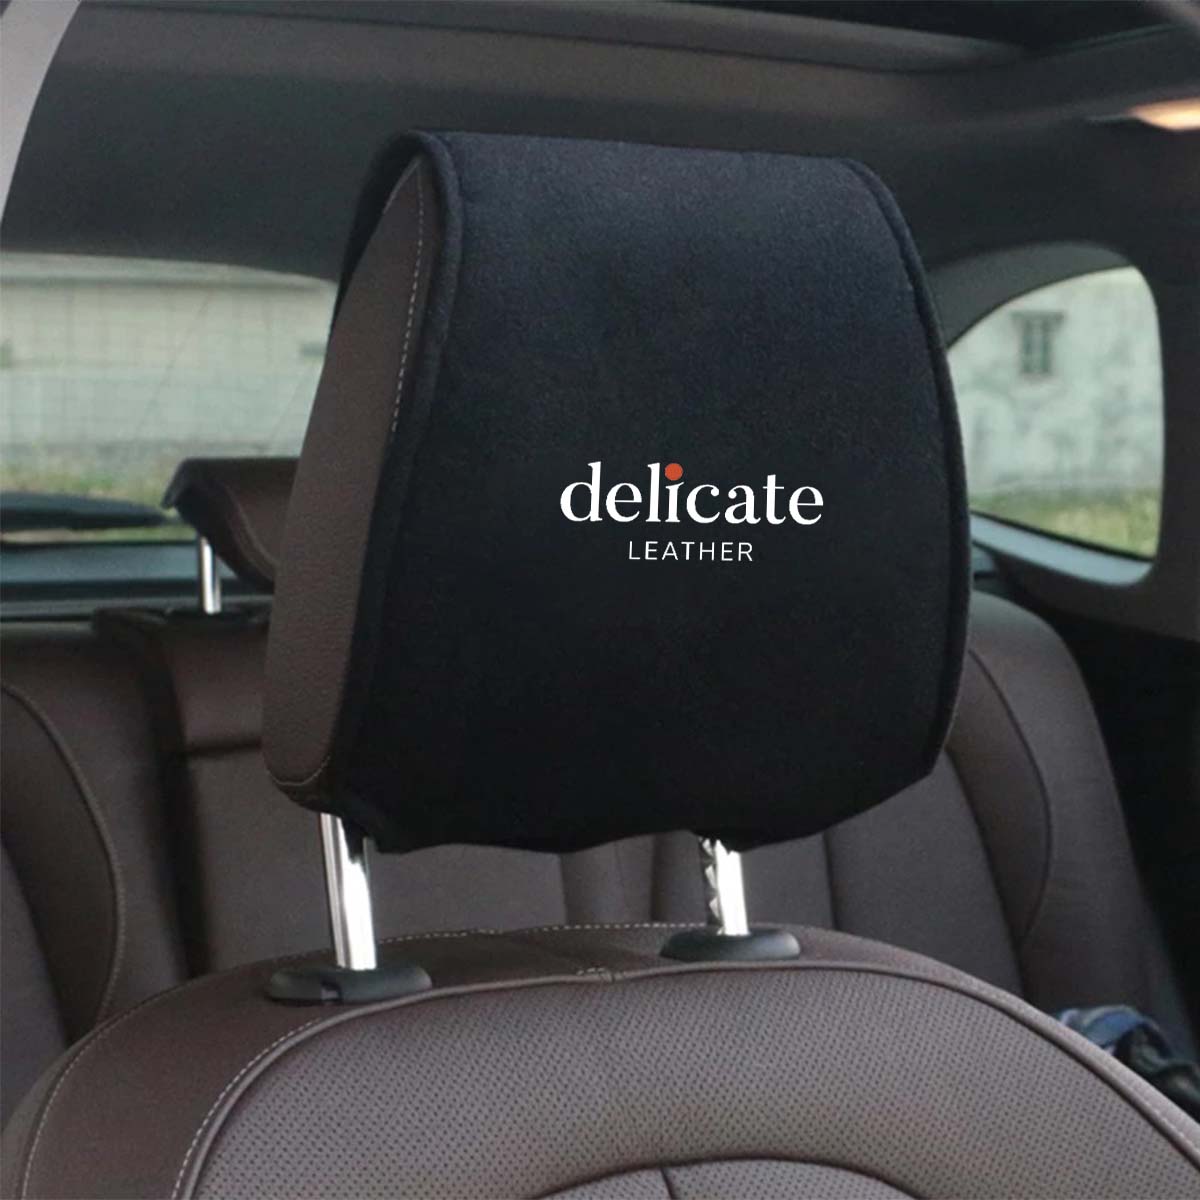 Delicate Leather Car Seat Headrest Cover: Stylish Protection for Your Vehicle's Headrests